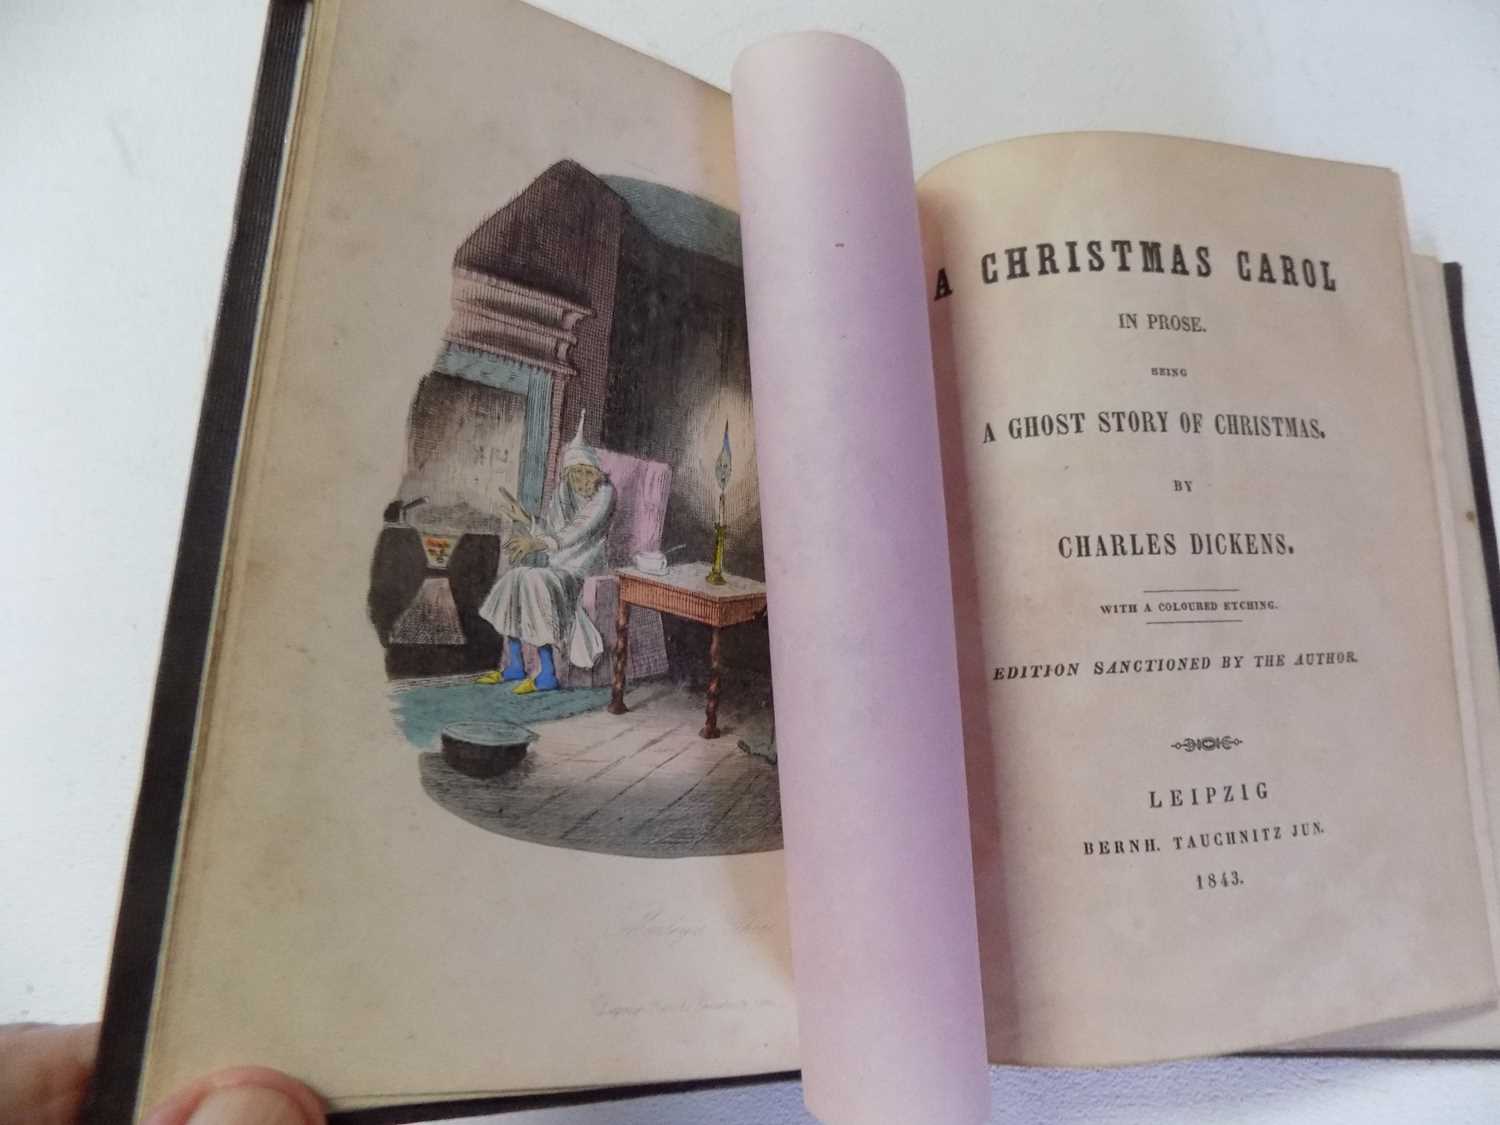 CHARLES DICKENS. "A Christmas Carol in Prose, being A Ghost Story of Christmas, by Charles Dickens." - Image 2 of 5